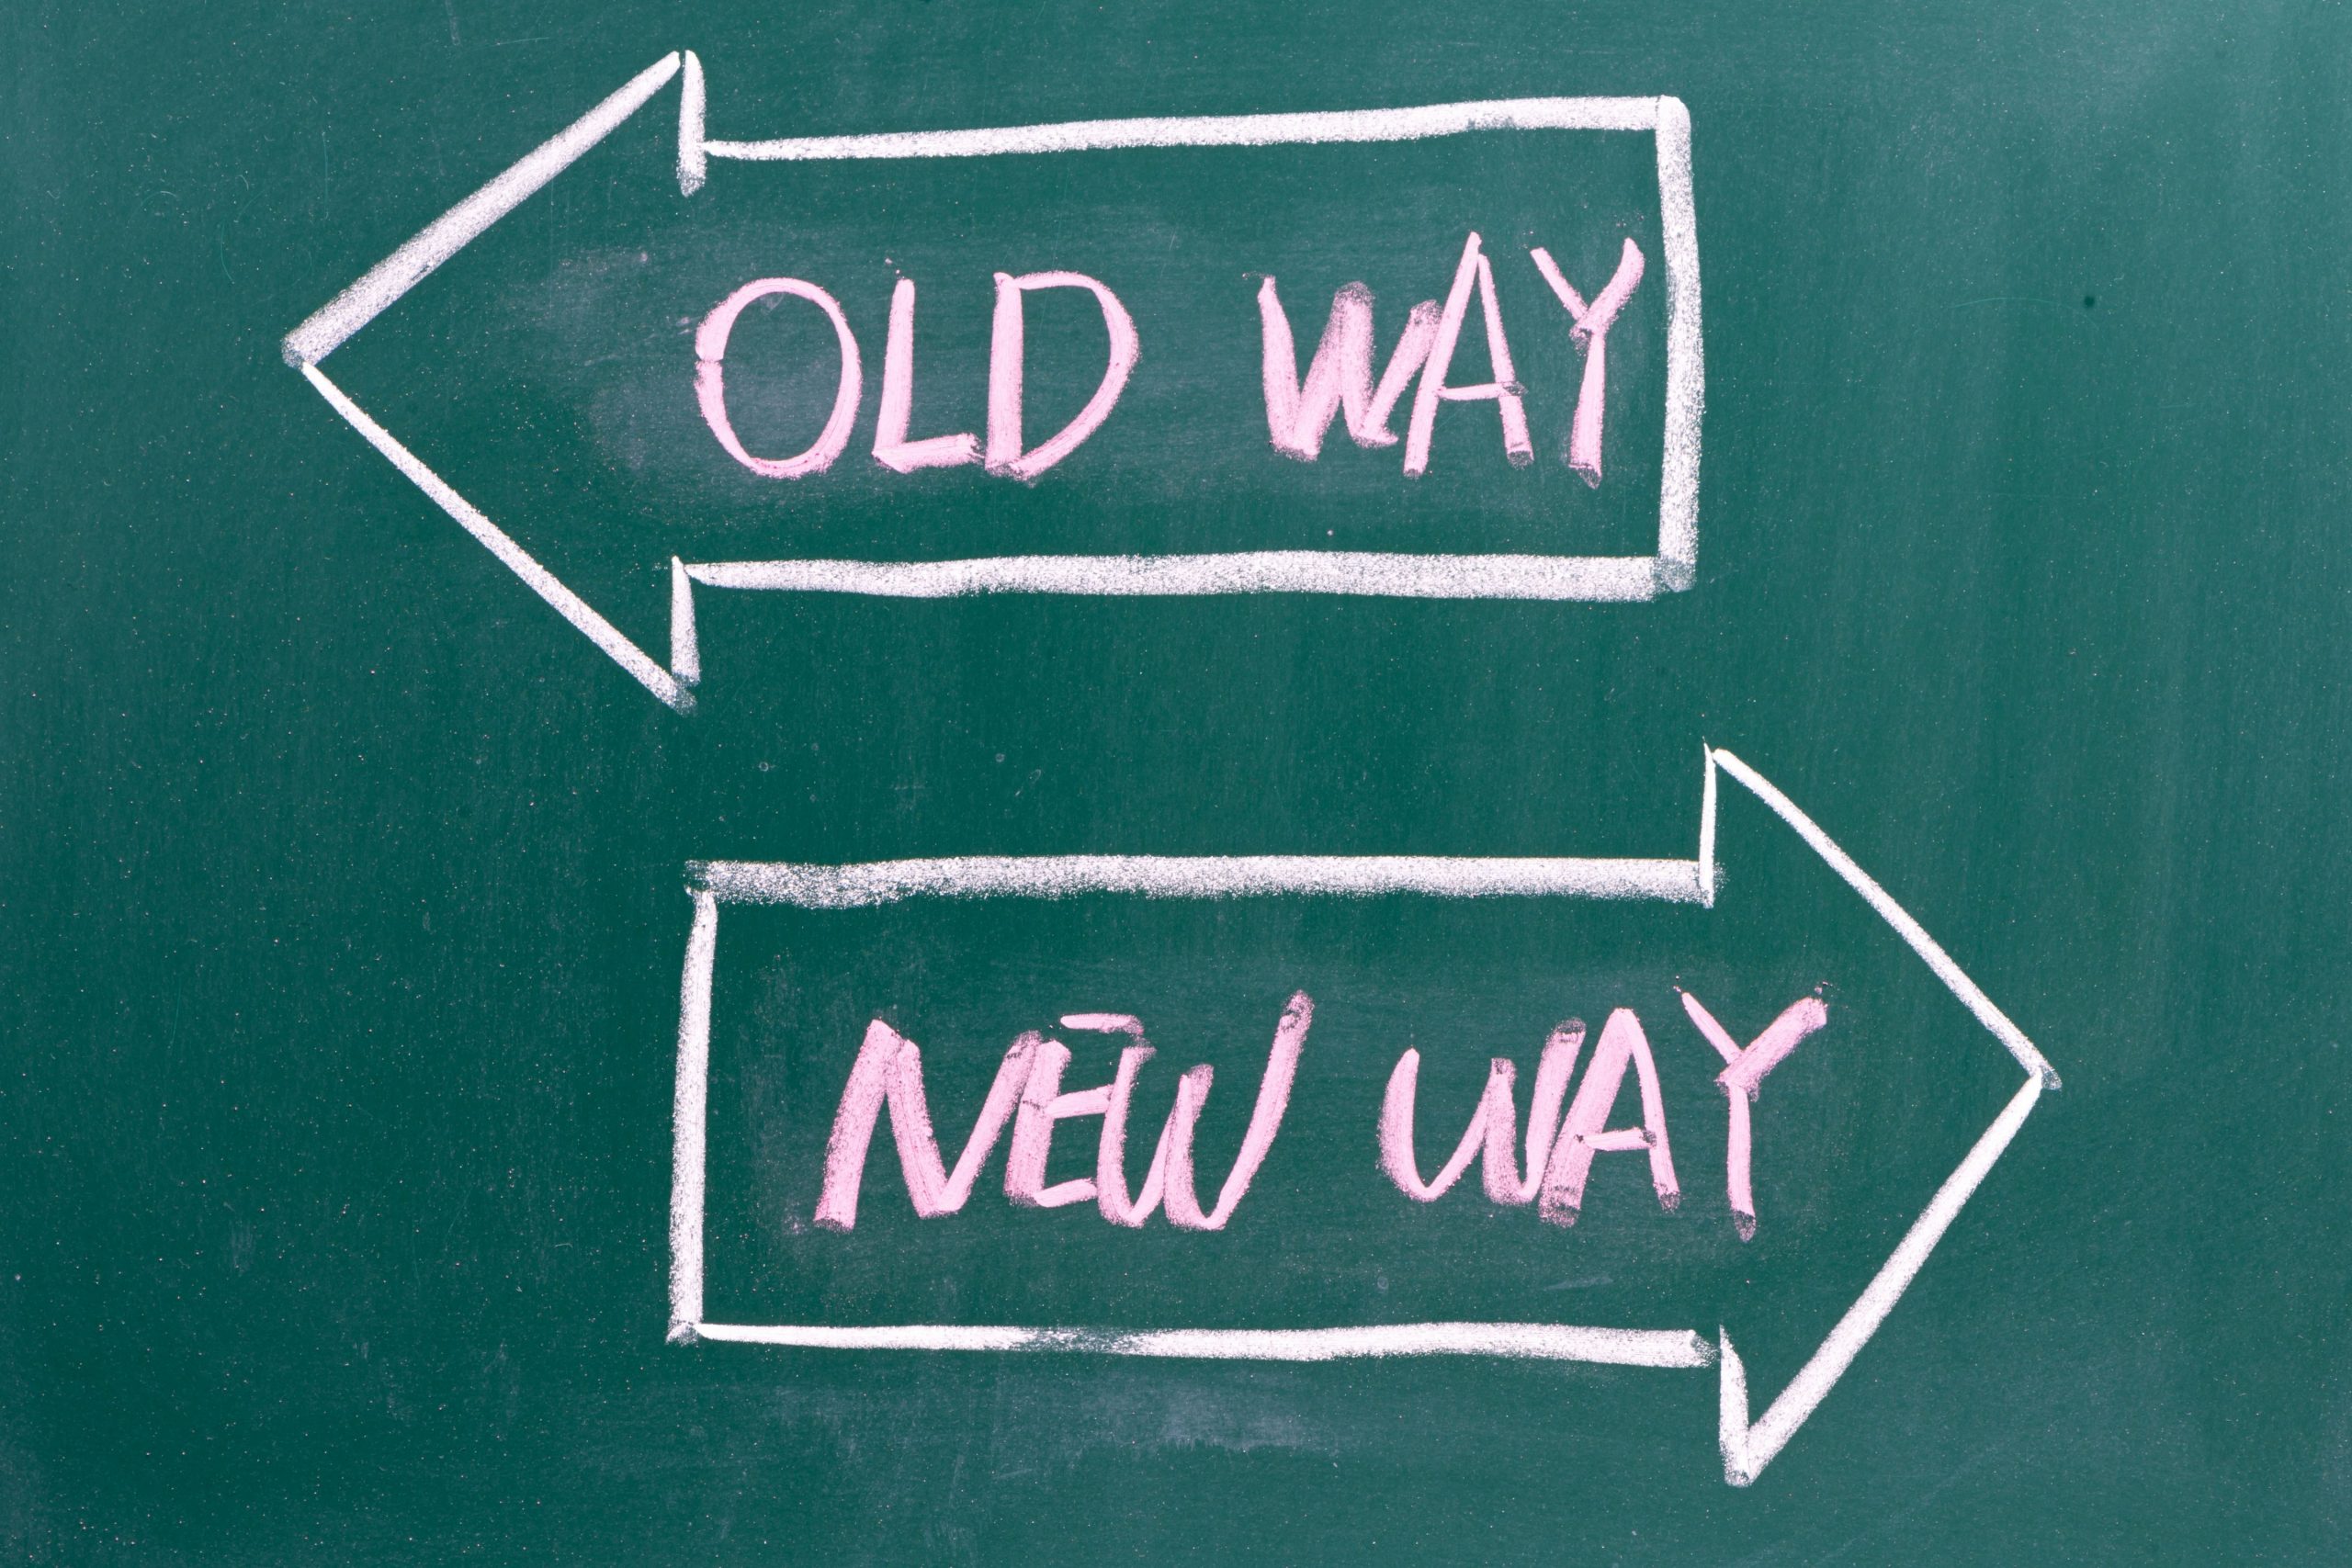 New ways old. Old way. Картинка old way New way. Old ways книга. New way учебник.